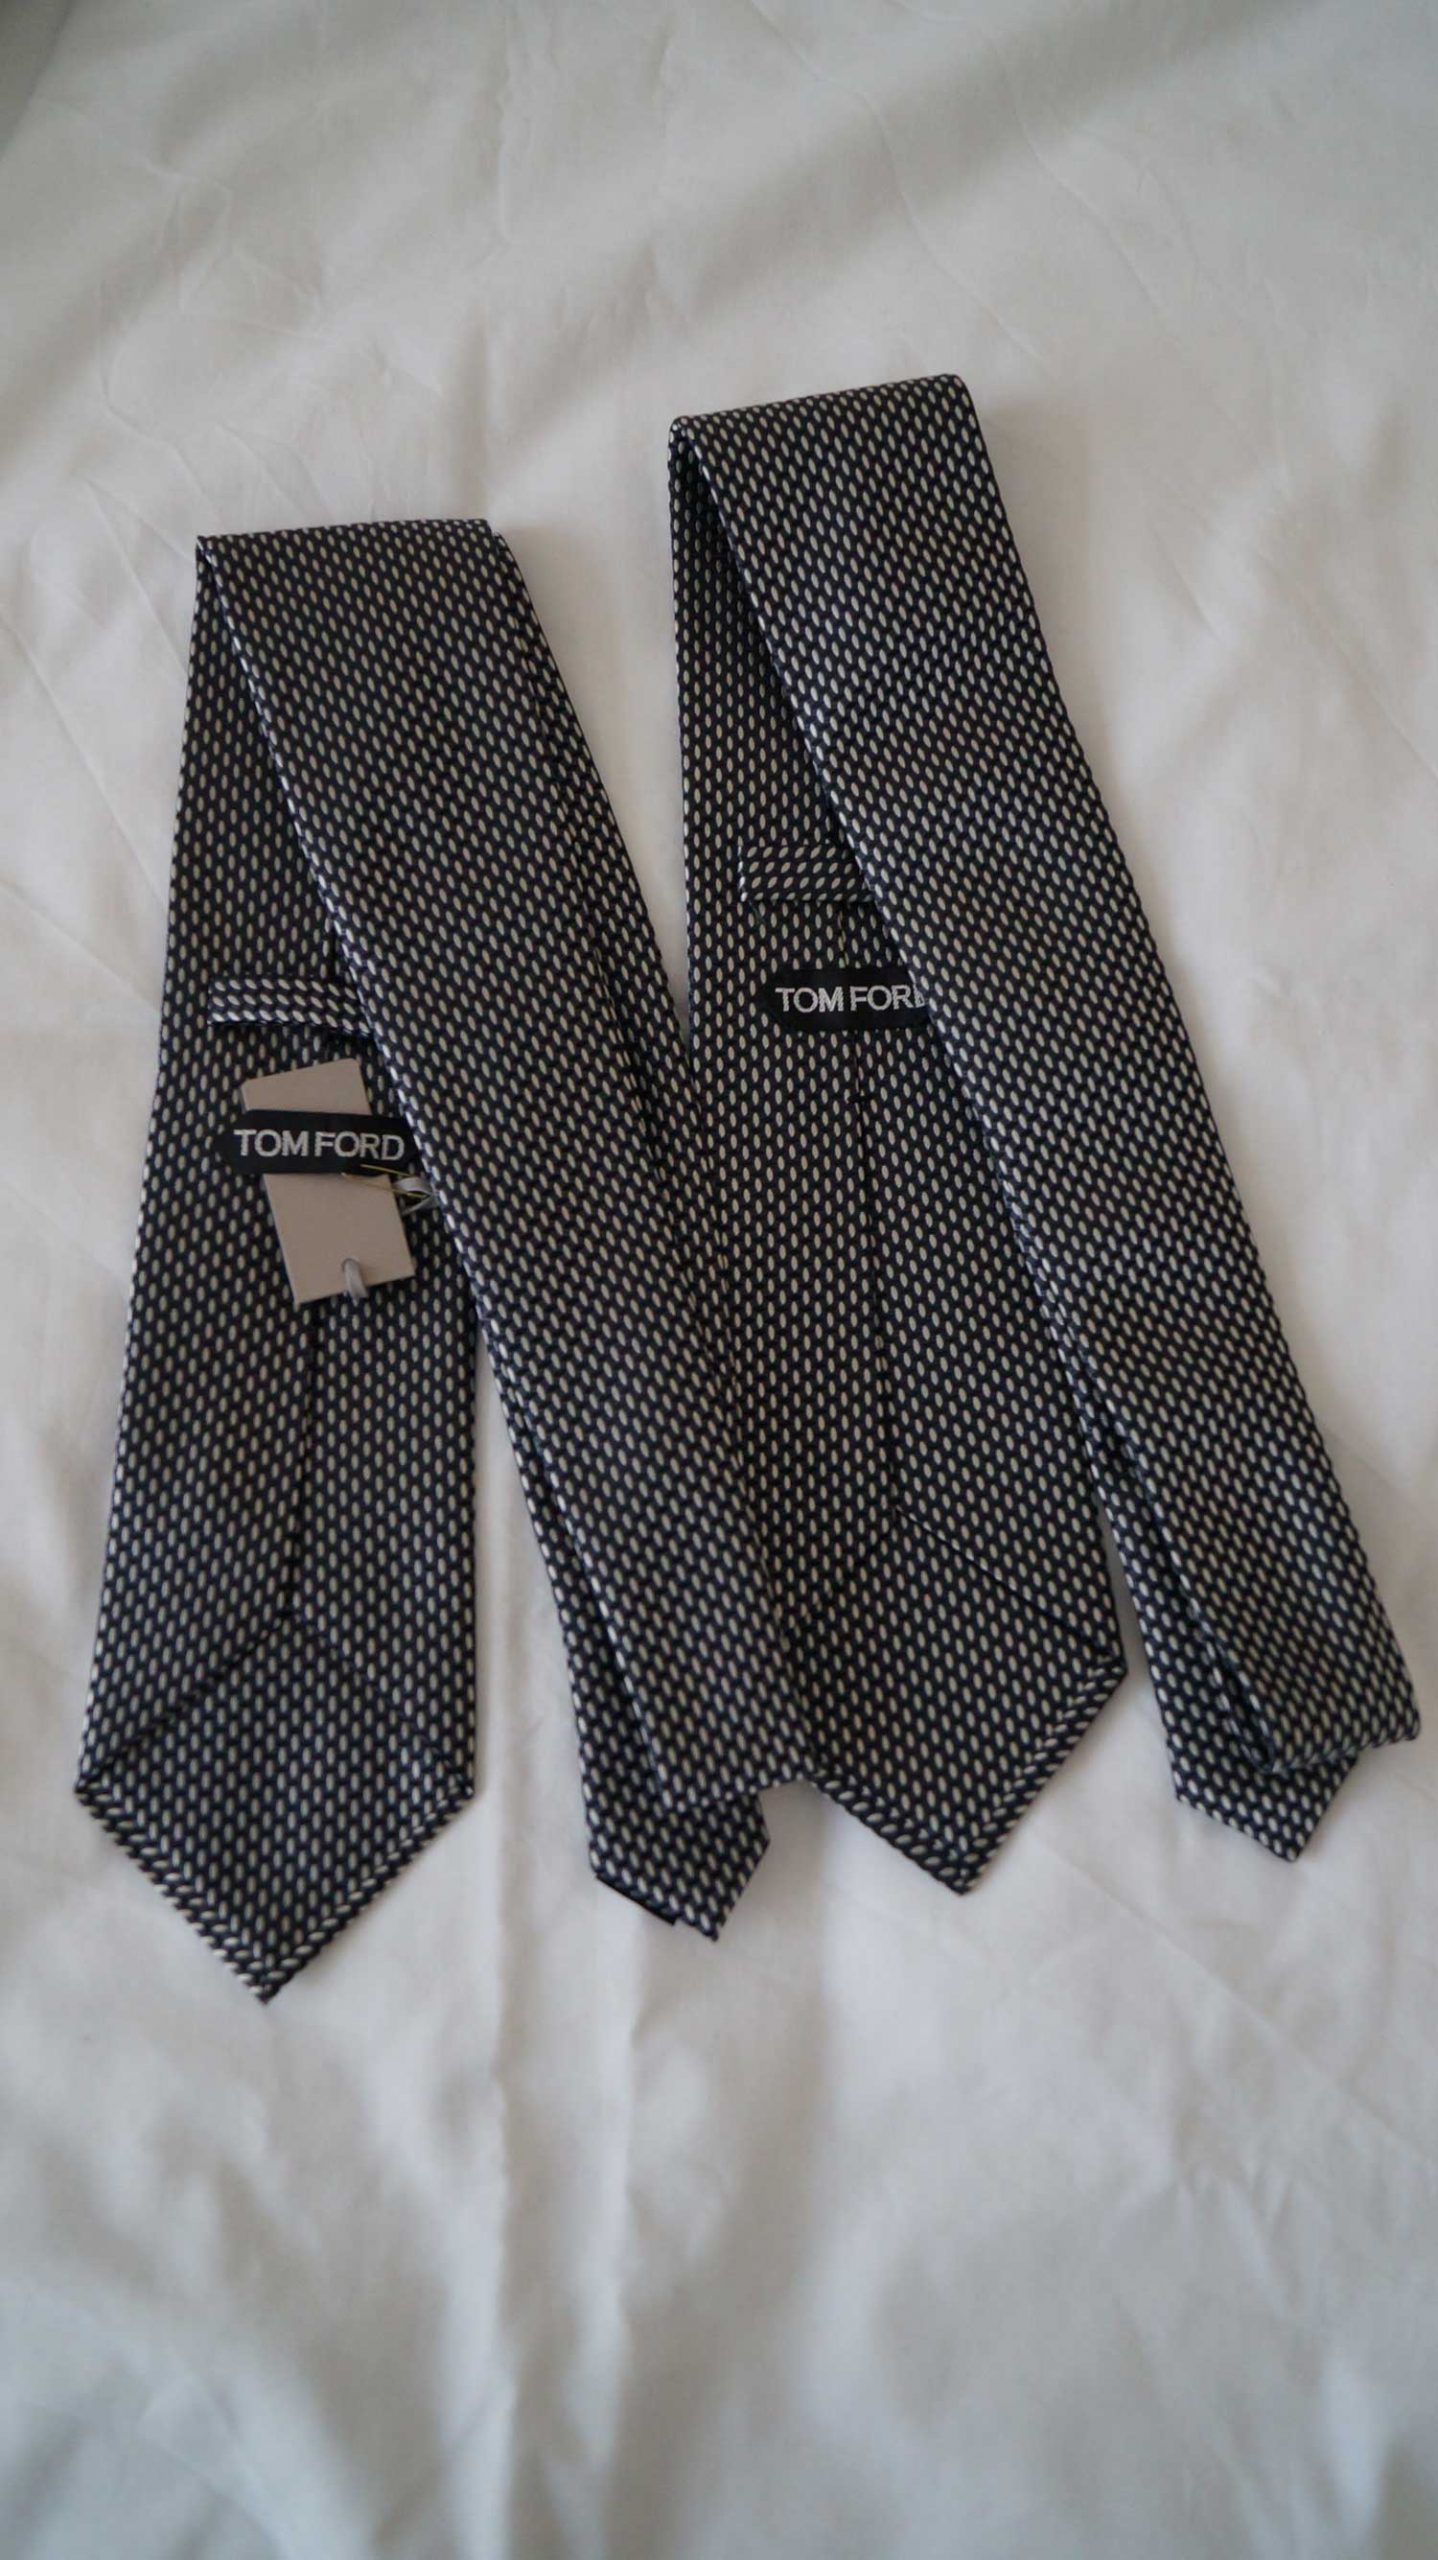 Recreating the Tom Ford Ties from Quantum of Solace